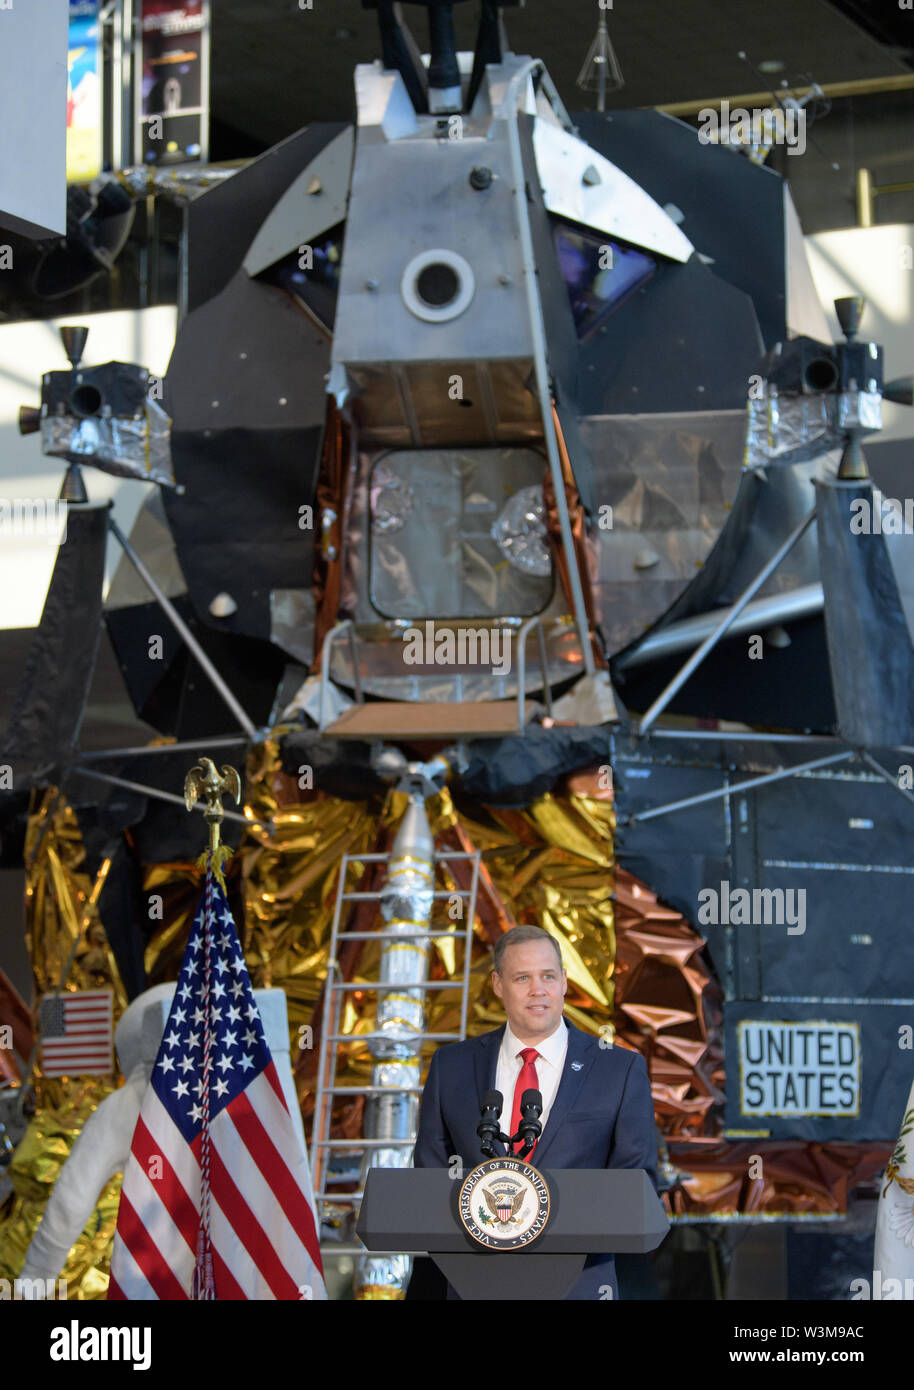 Washington DC, USA. 16th July, 2019. NASA Administrator Jim Bridenstine delivers remarks during the unveiling of a display featuring the spacesuit of Apollo 11 astronaut Neil Armstrong at the Smithsonian National Air and Space Museum July 16, 2019 in Washington, DC. The event marks the 50th anniversary of the launch of the Apollo 11 mission. Credit: Planetpix/Alamy Live News Stock Photo